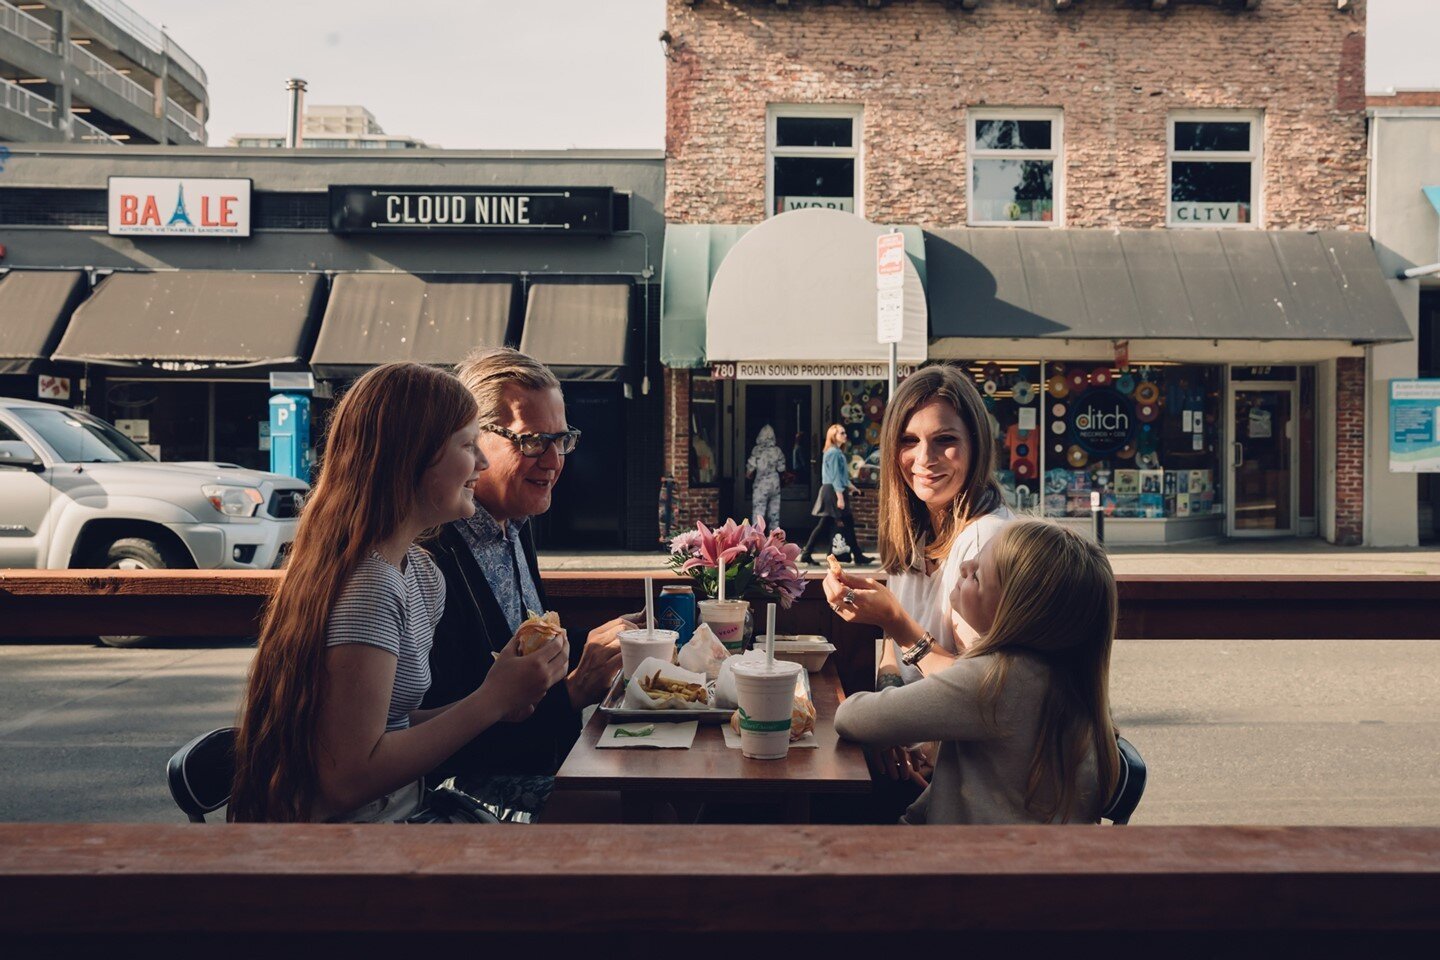 Patio goals. Bring the fam down for dinner tonight, or order pick-up or delivery at the link in our bio.⁠
⁠
.⁠
.⁠
.⁠
.⁠
⁠
#yyjfood #yyjfoodie #yyjeats #yyjevents #yyjbusiness #victoriabc #tourismbc #explorebc #exploreyyj #tourismvictoria #downtownvic